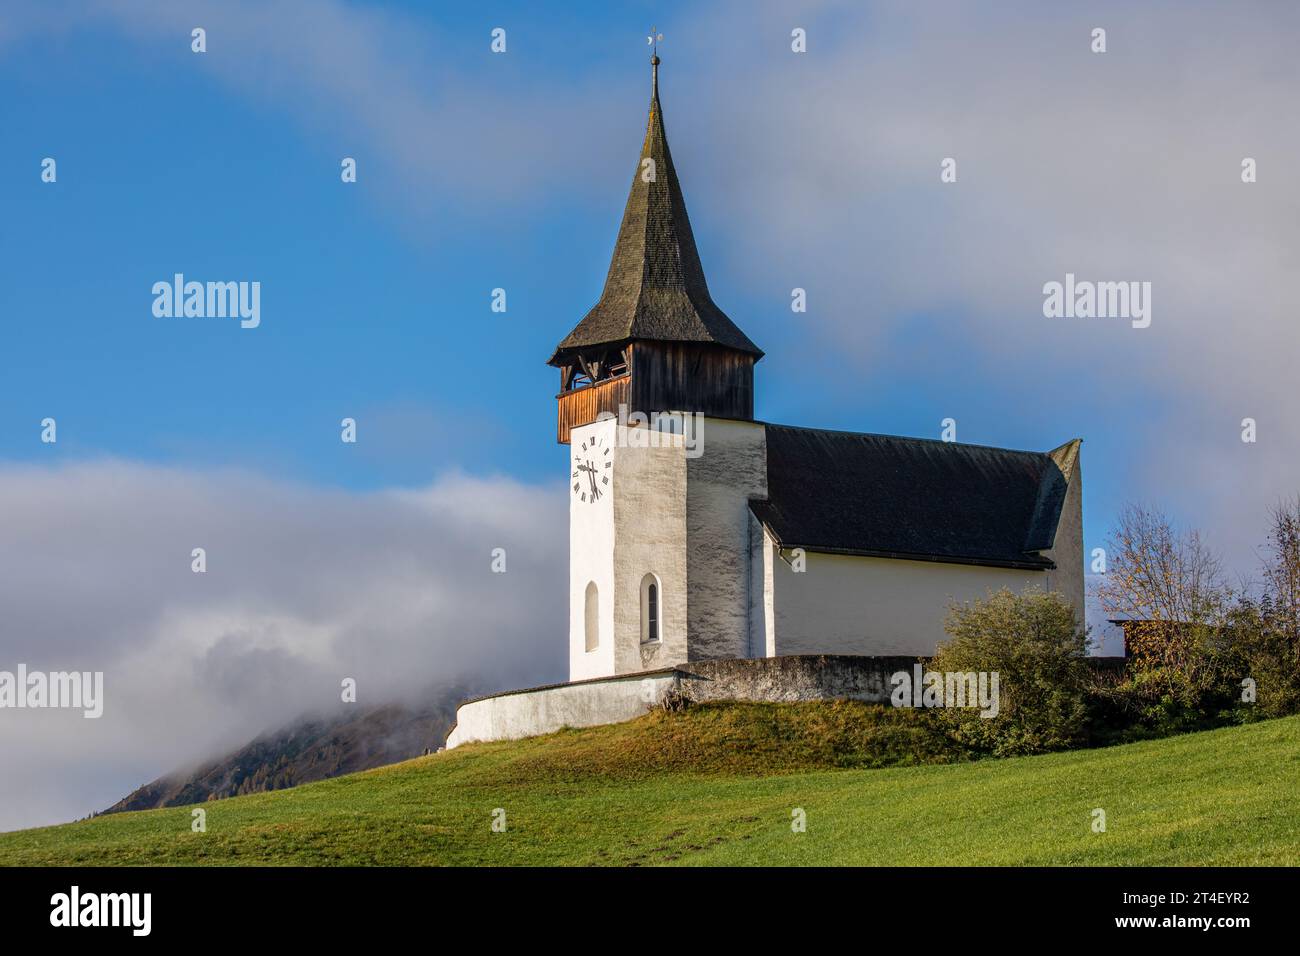 Reformierte Kirche church in the autumn Alps. Amazing landscape with small chapel on sunny meadow at Davos Frauenkirch, Davos, Switzerland Stock Photo